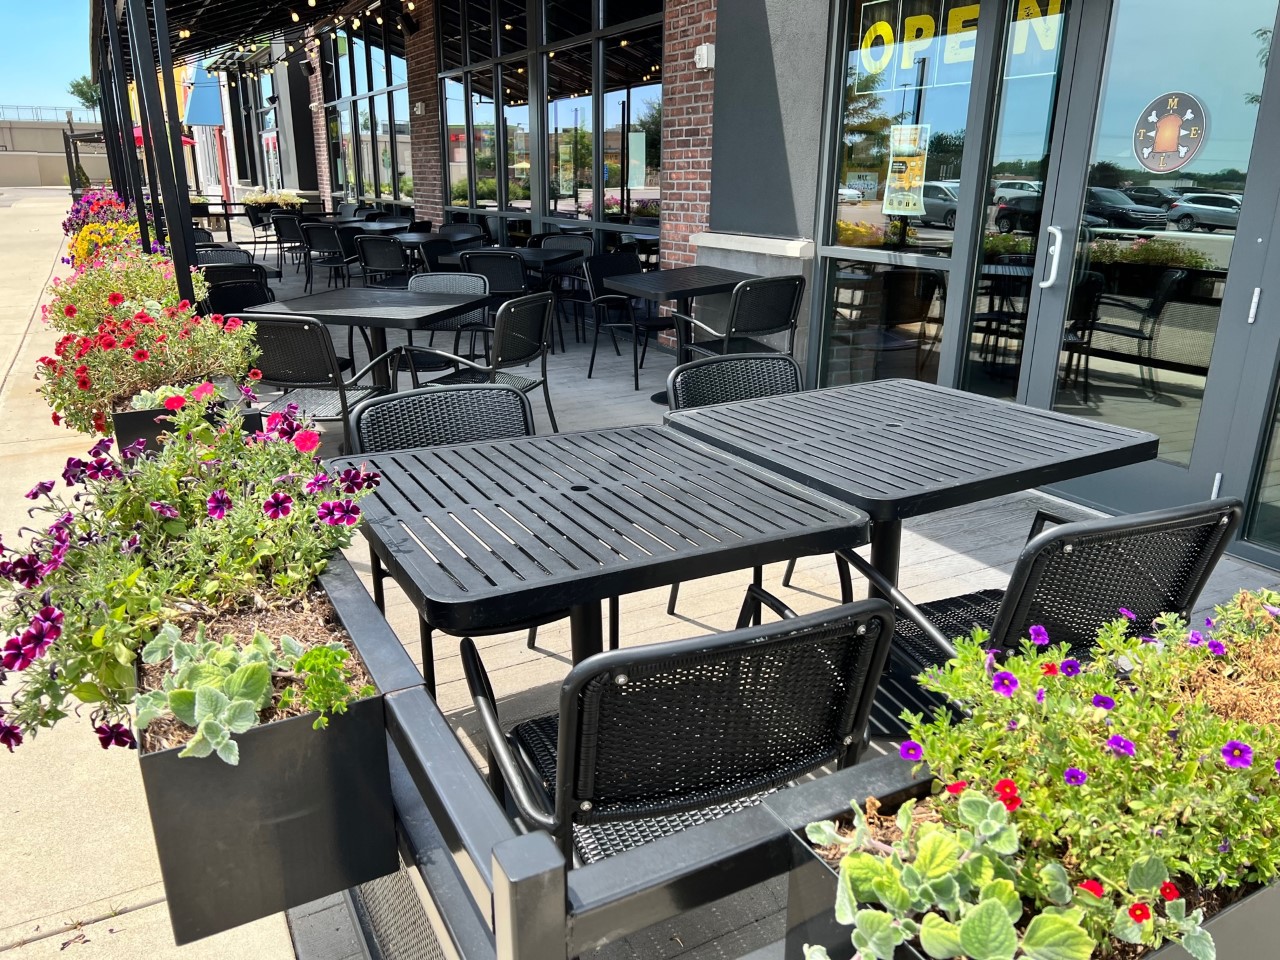 The patio at MELT on the Mall at Fairfeld Commons provides shade and protection from the elements while dining.